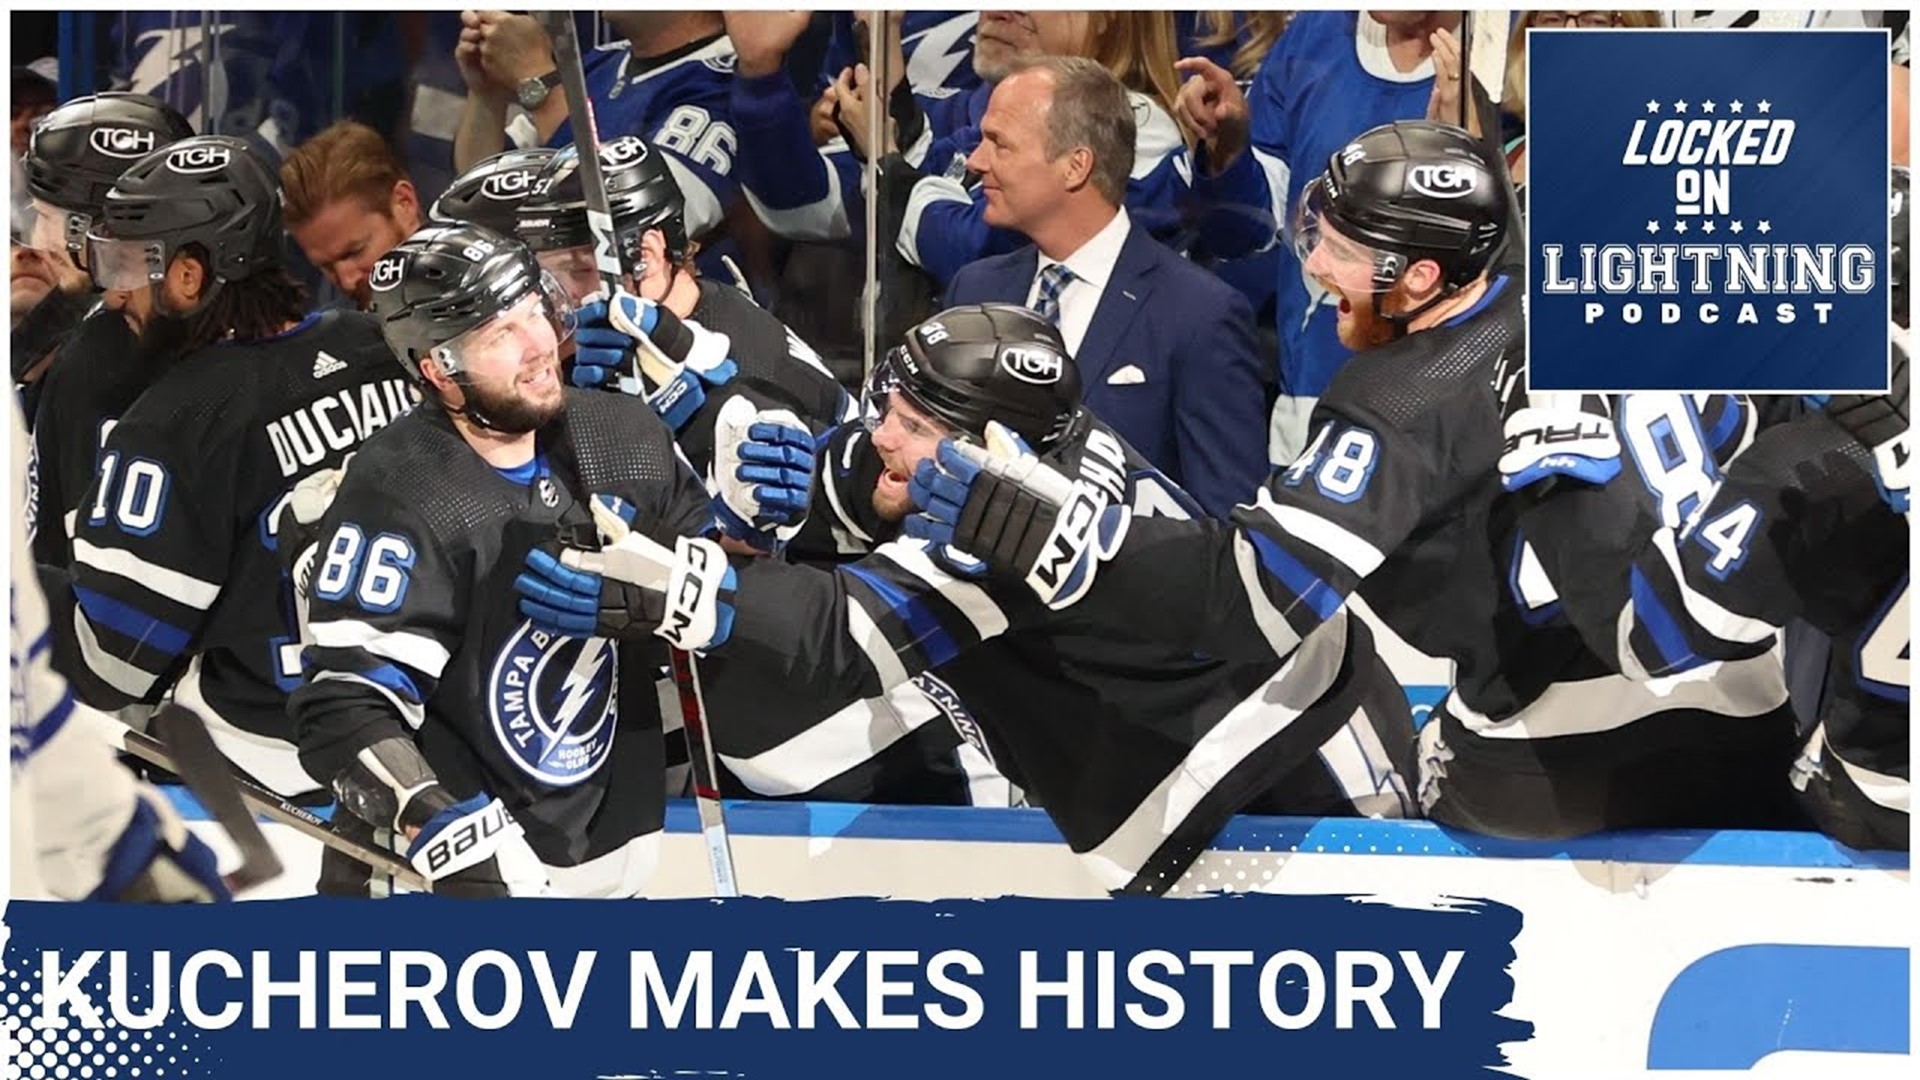 Nikita Kucherov made history tonight, becoming the fifth player ever to record 100 assists in a season.